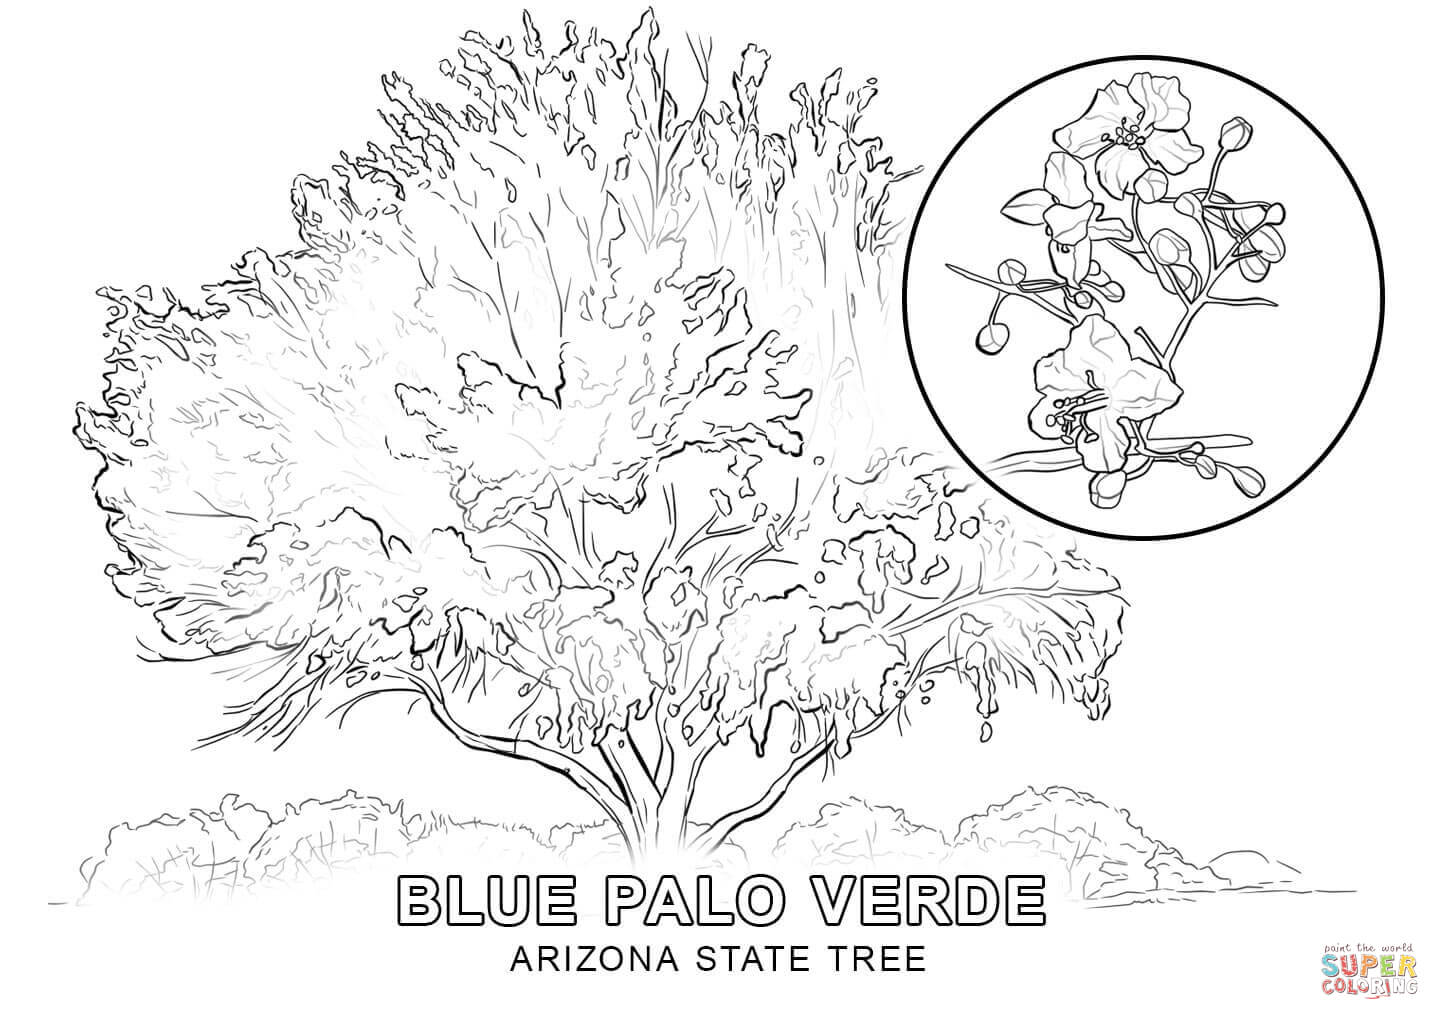 Arizona State Symbols Coloring Pages - Coloring Pages For All Ages